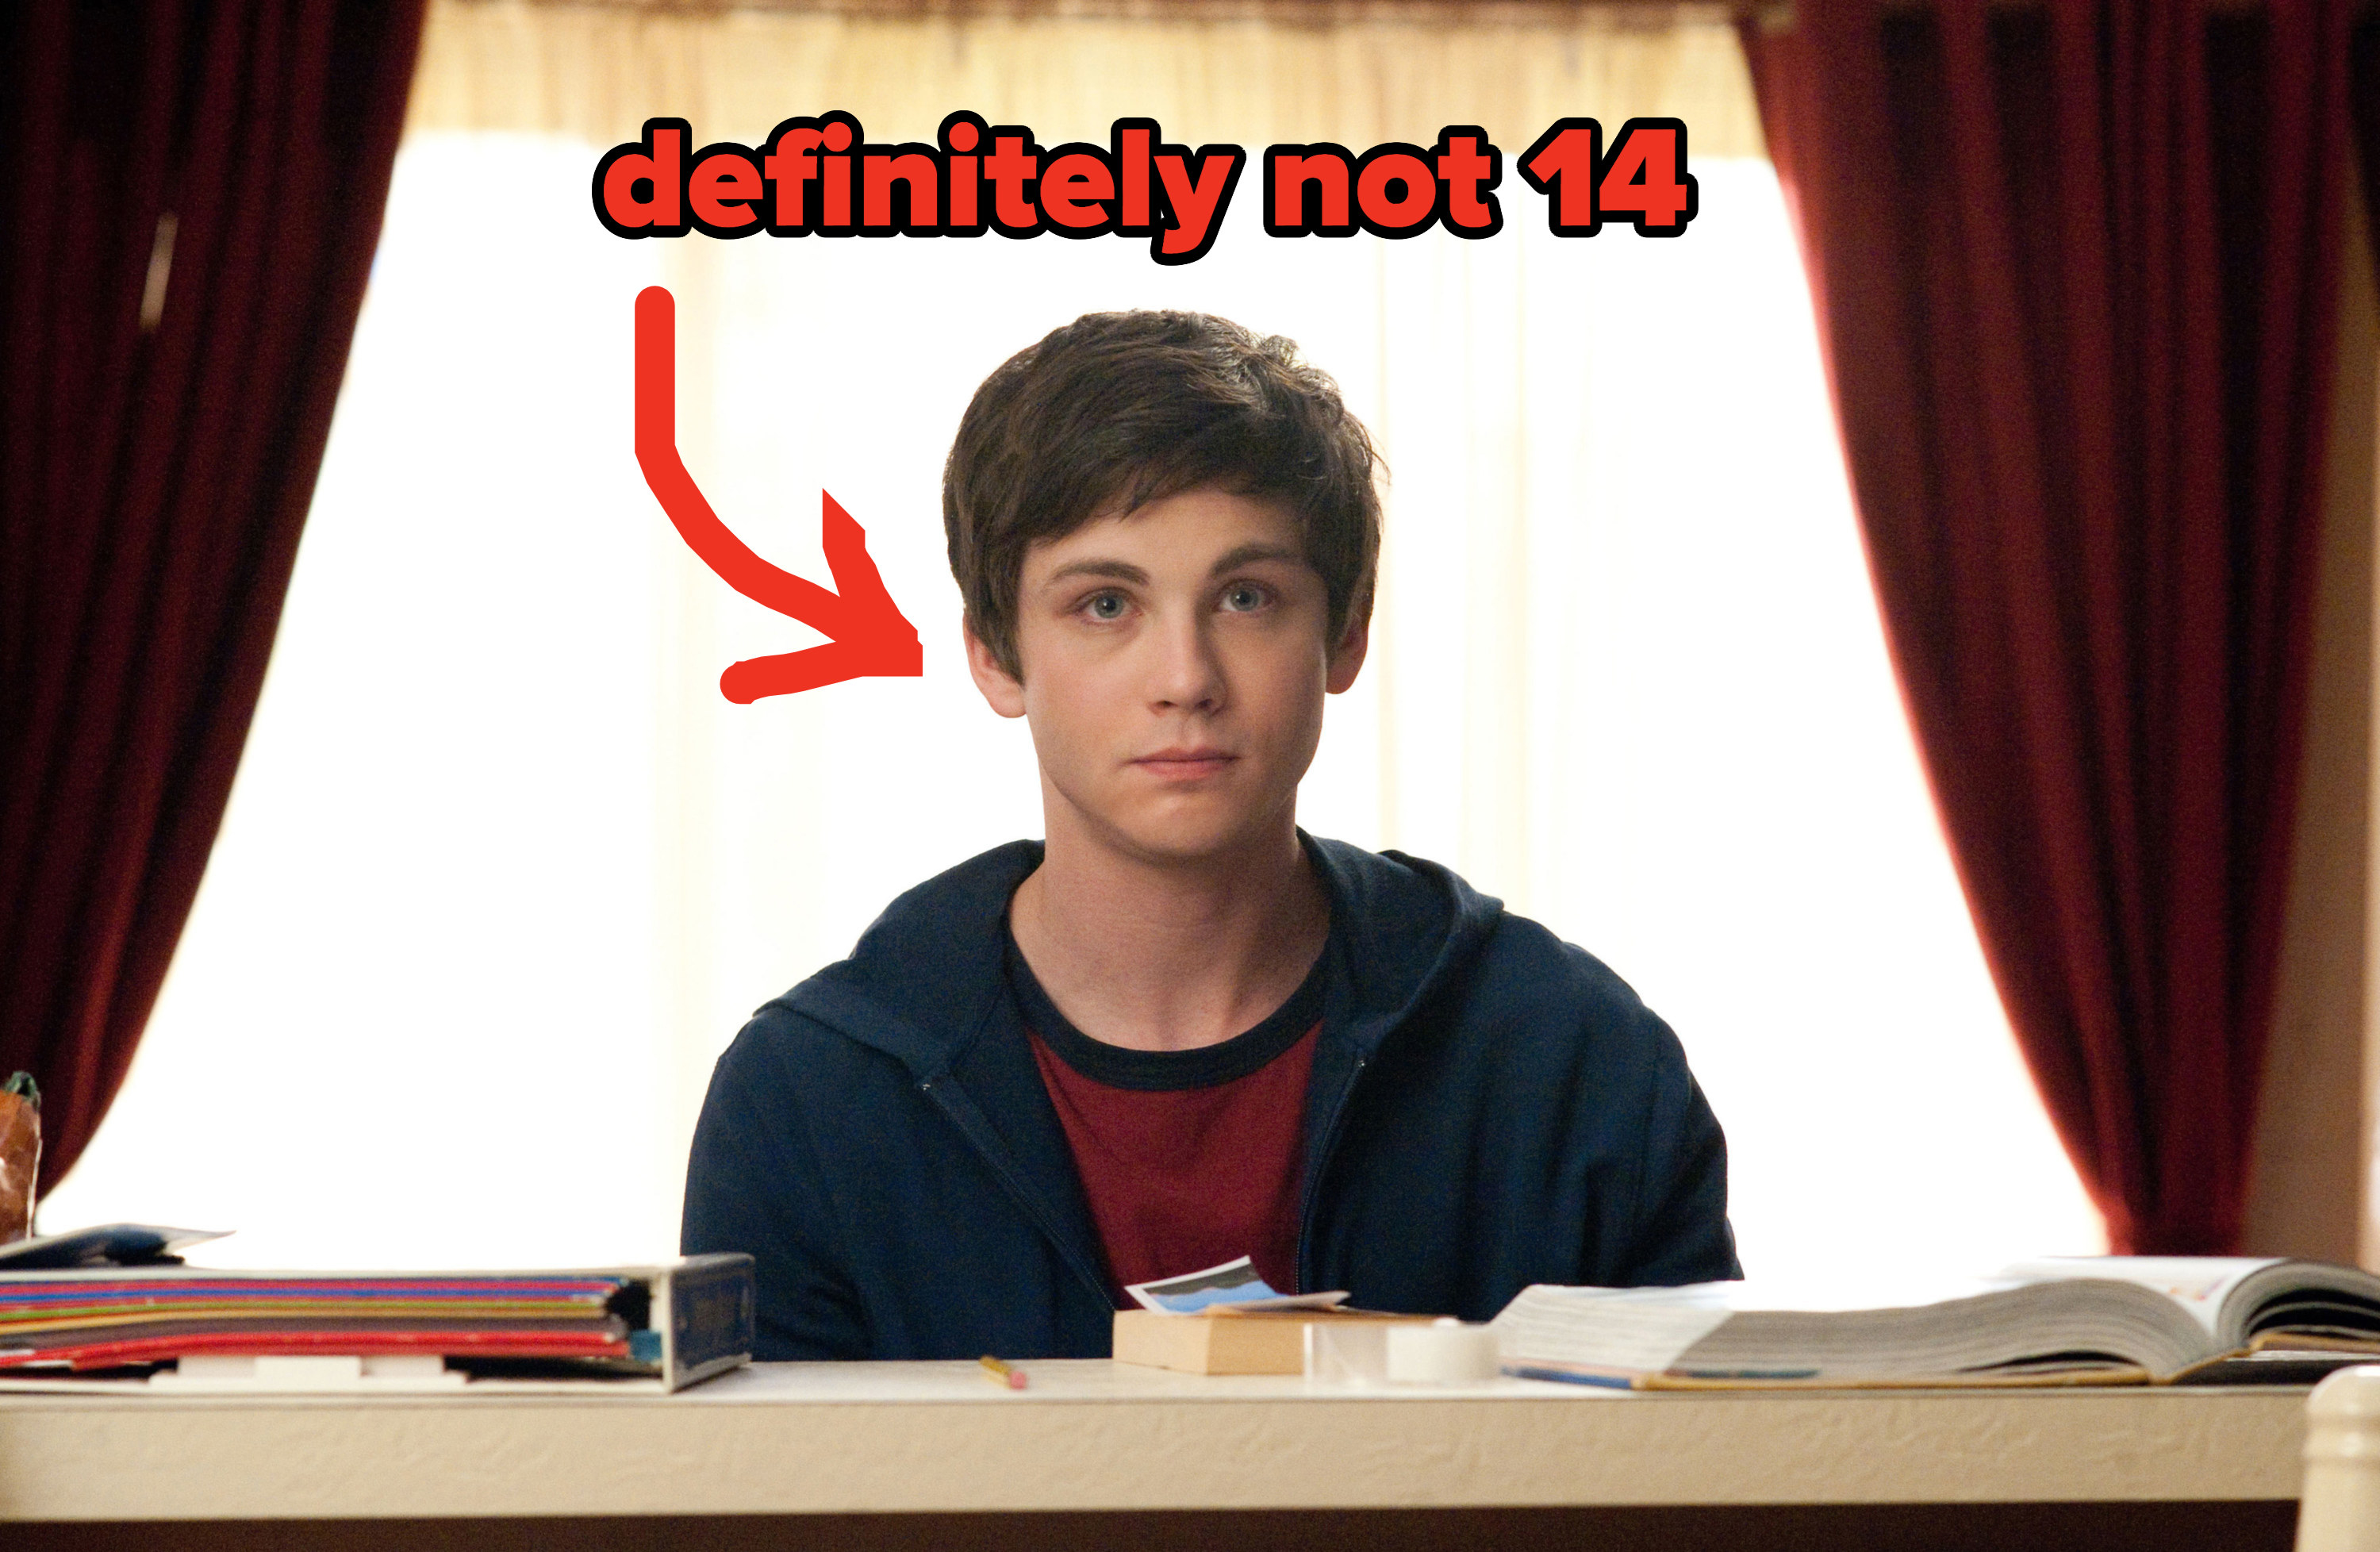 Logan in the film labeled &quot;definitely not 14&quot;